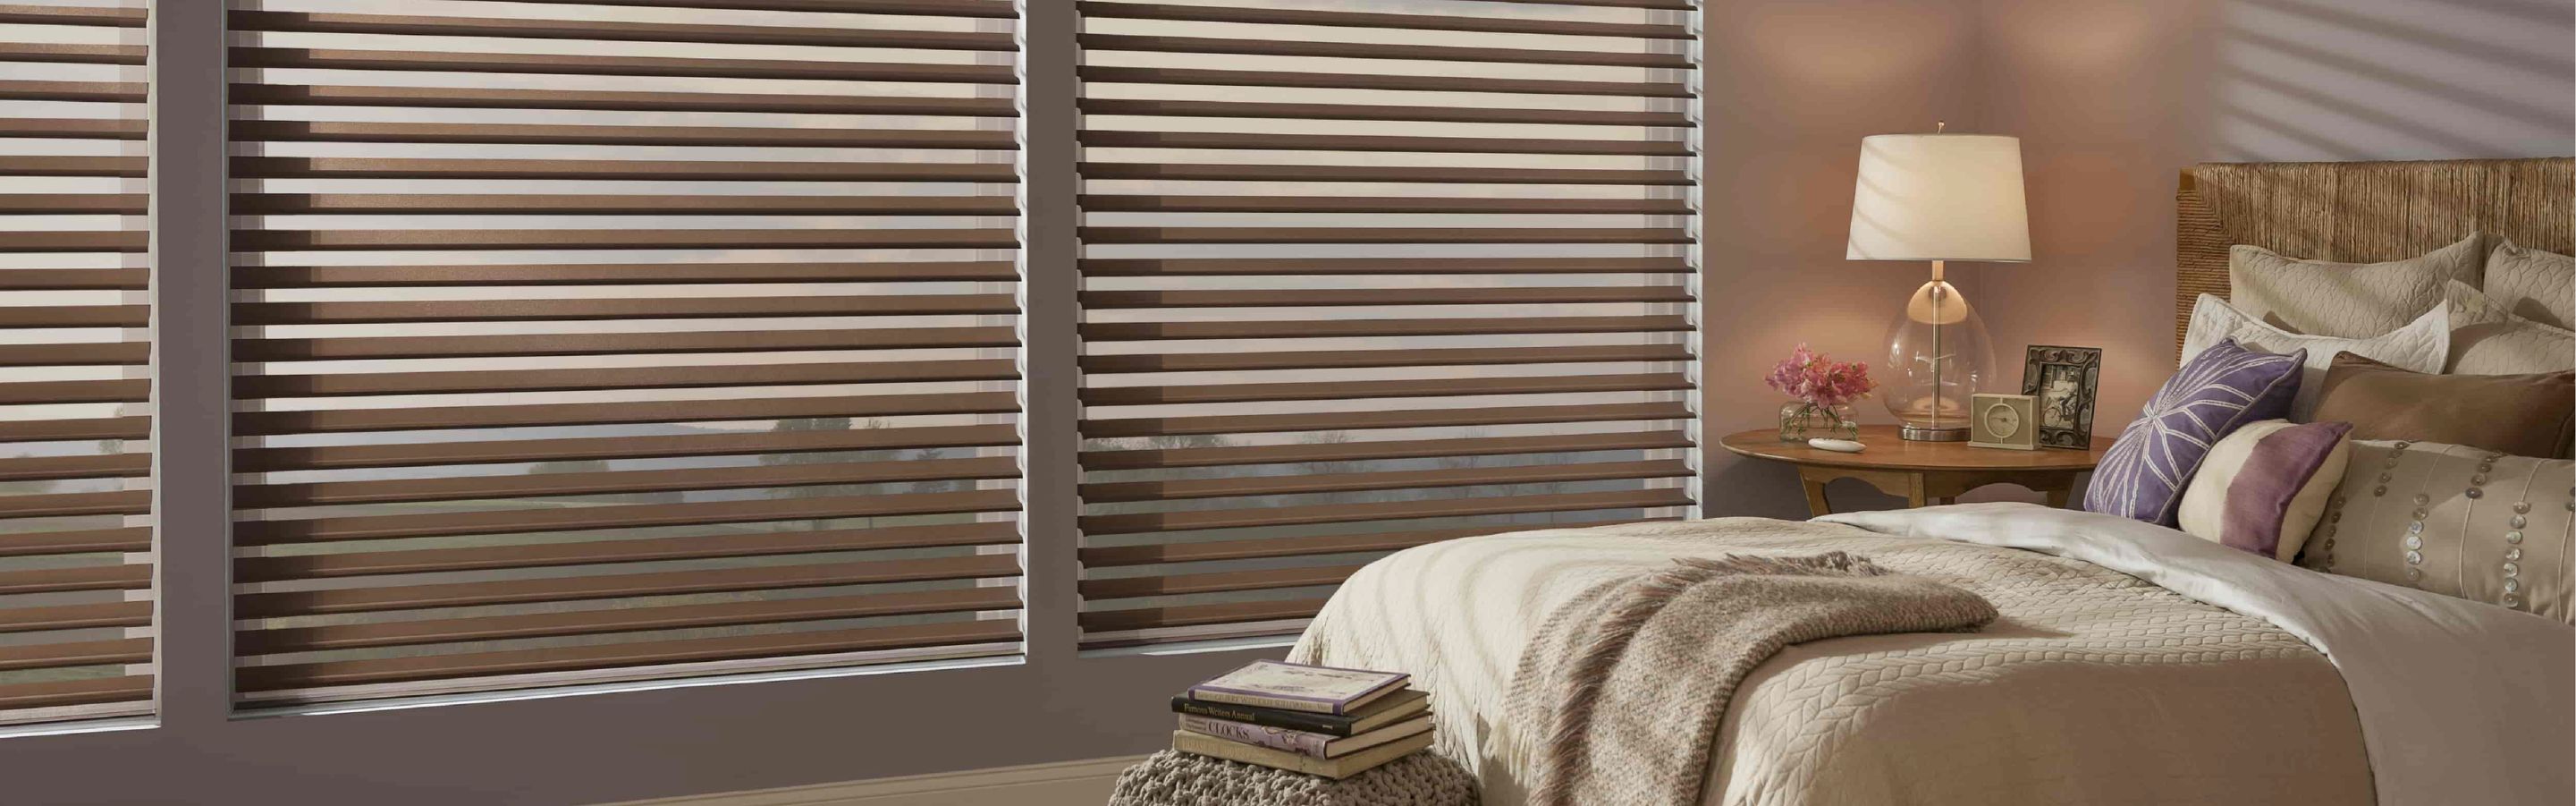 shade-o-matic blinds in a cozy bedroom